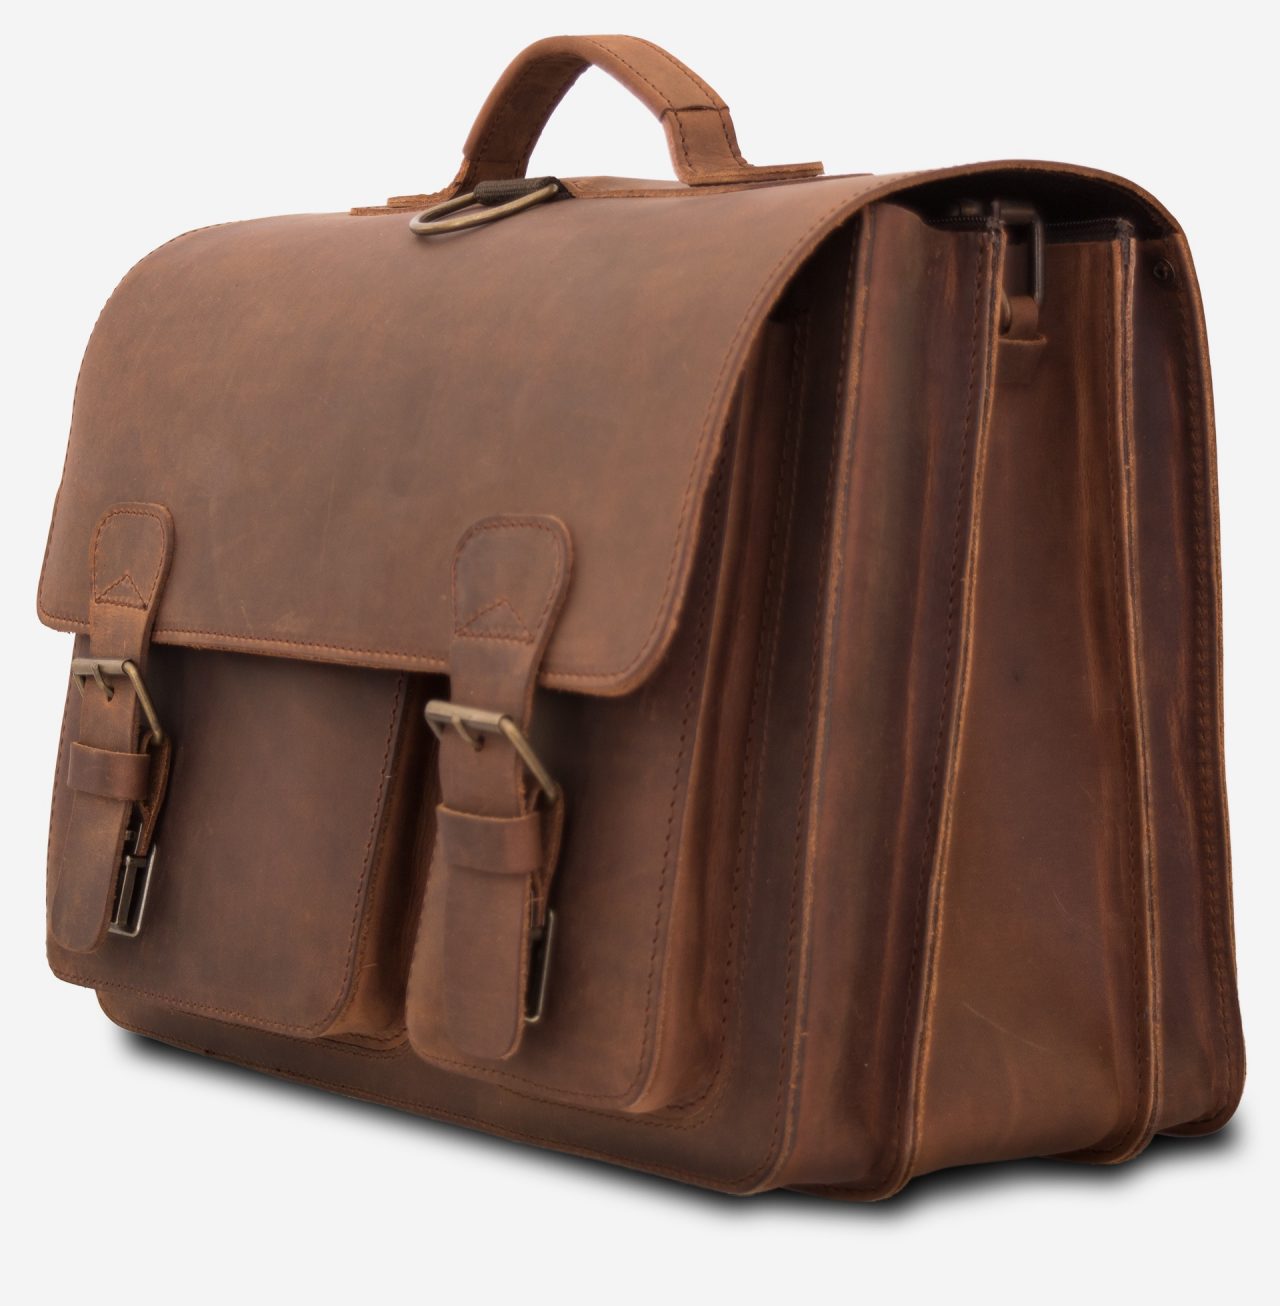 Large brown leather satchel briefcase with 3 compartments and 2 asymmetric front pockets.